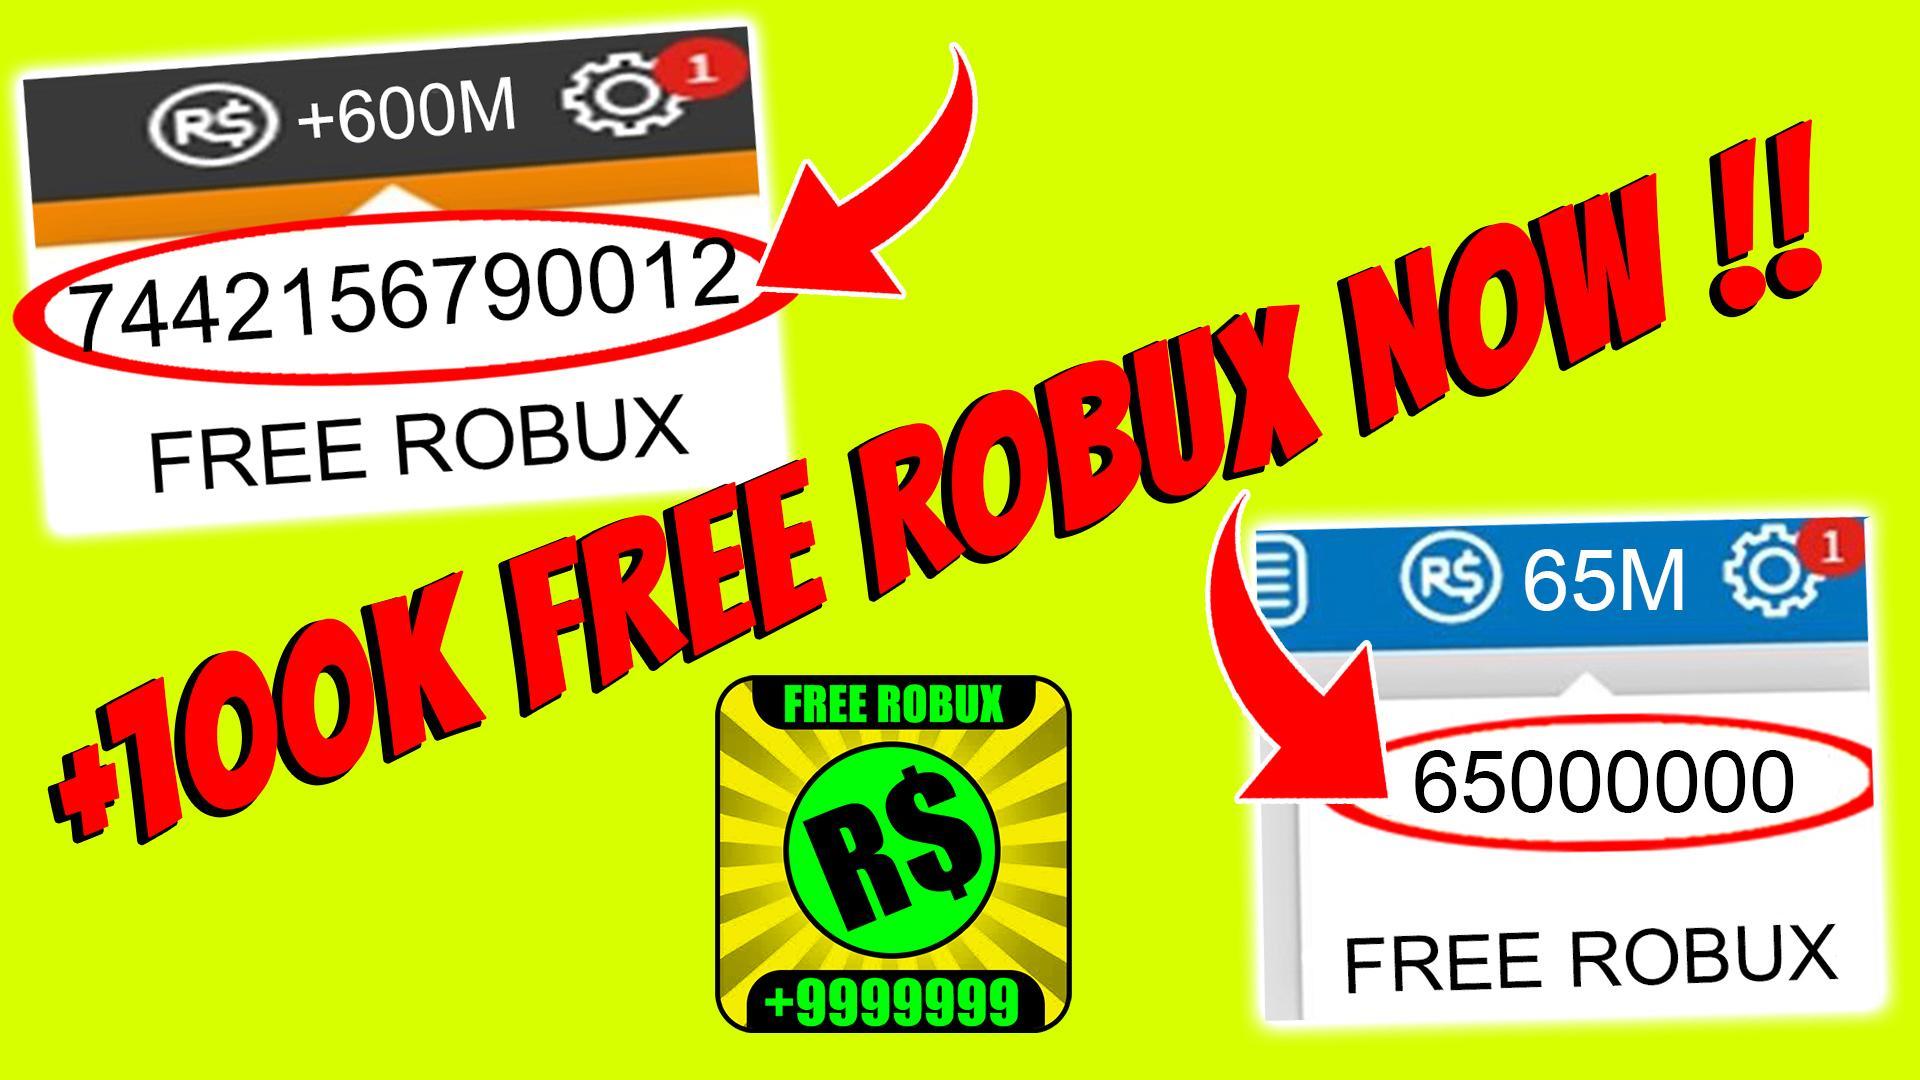 Unlimited Robux Tips For Android Apk Download - unlimited robux apk download